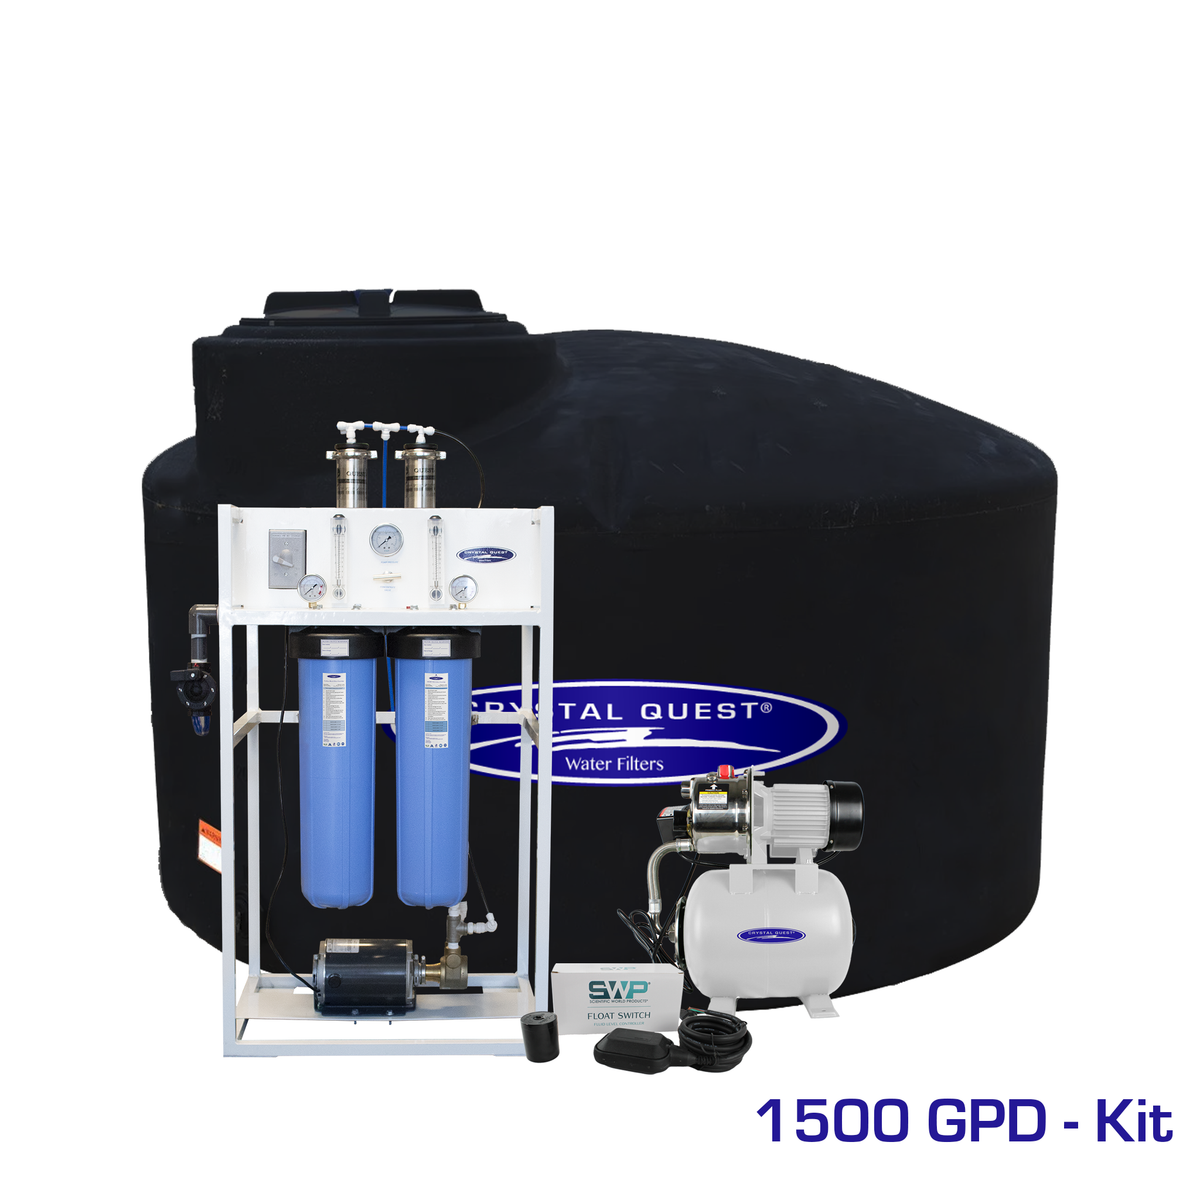 Commercial Mid-Flow Reverse Osmosis System (500-7000 GPD) - Commercial - Crystal Quest